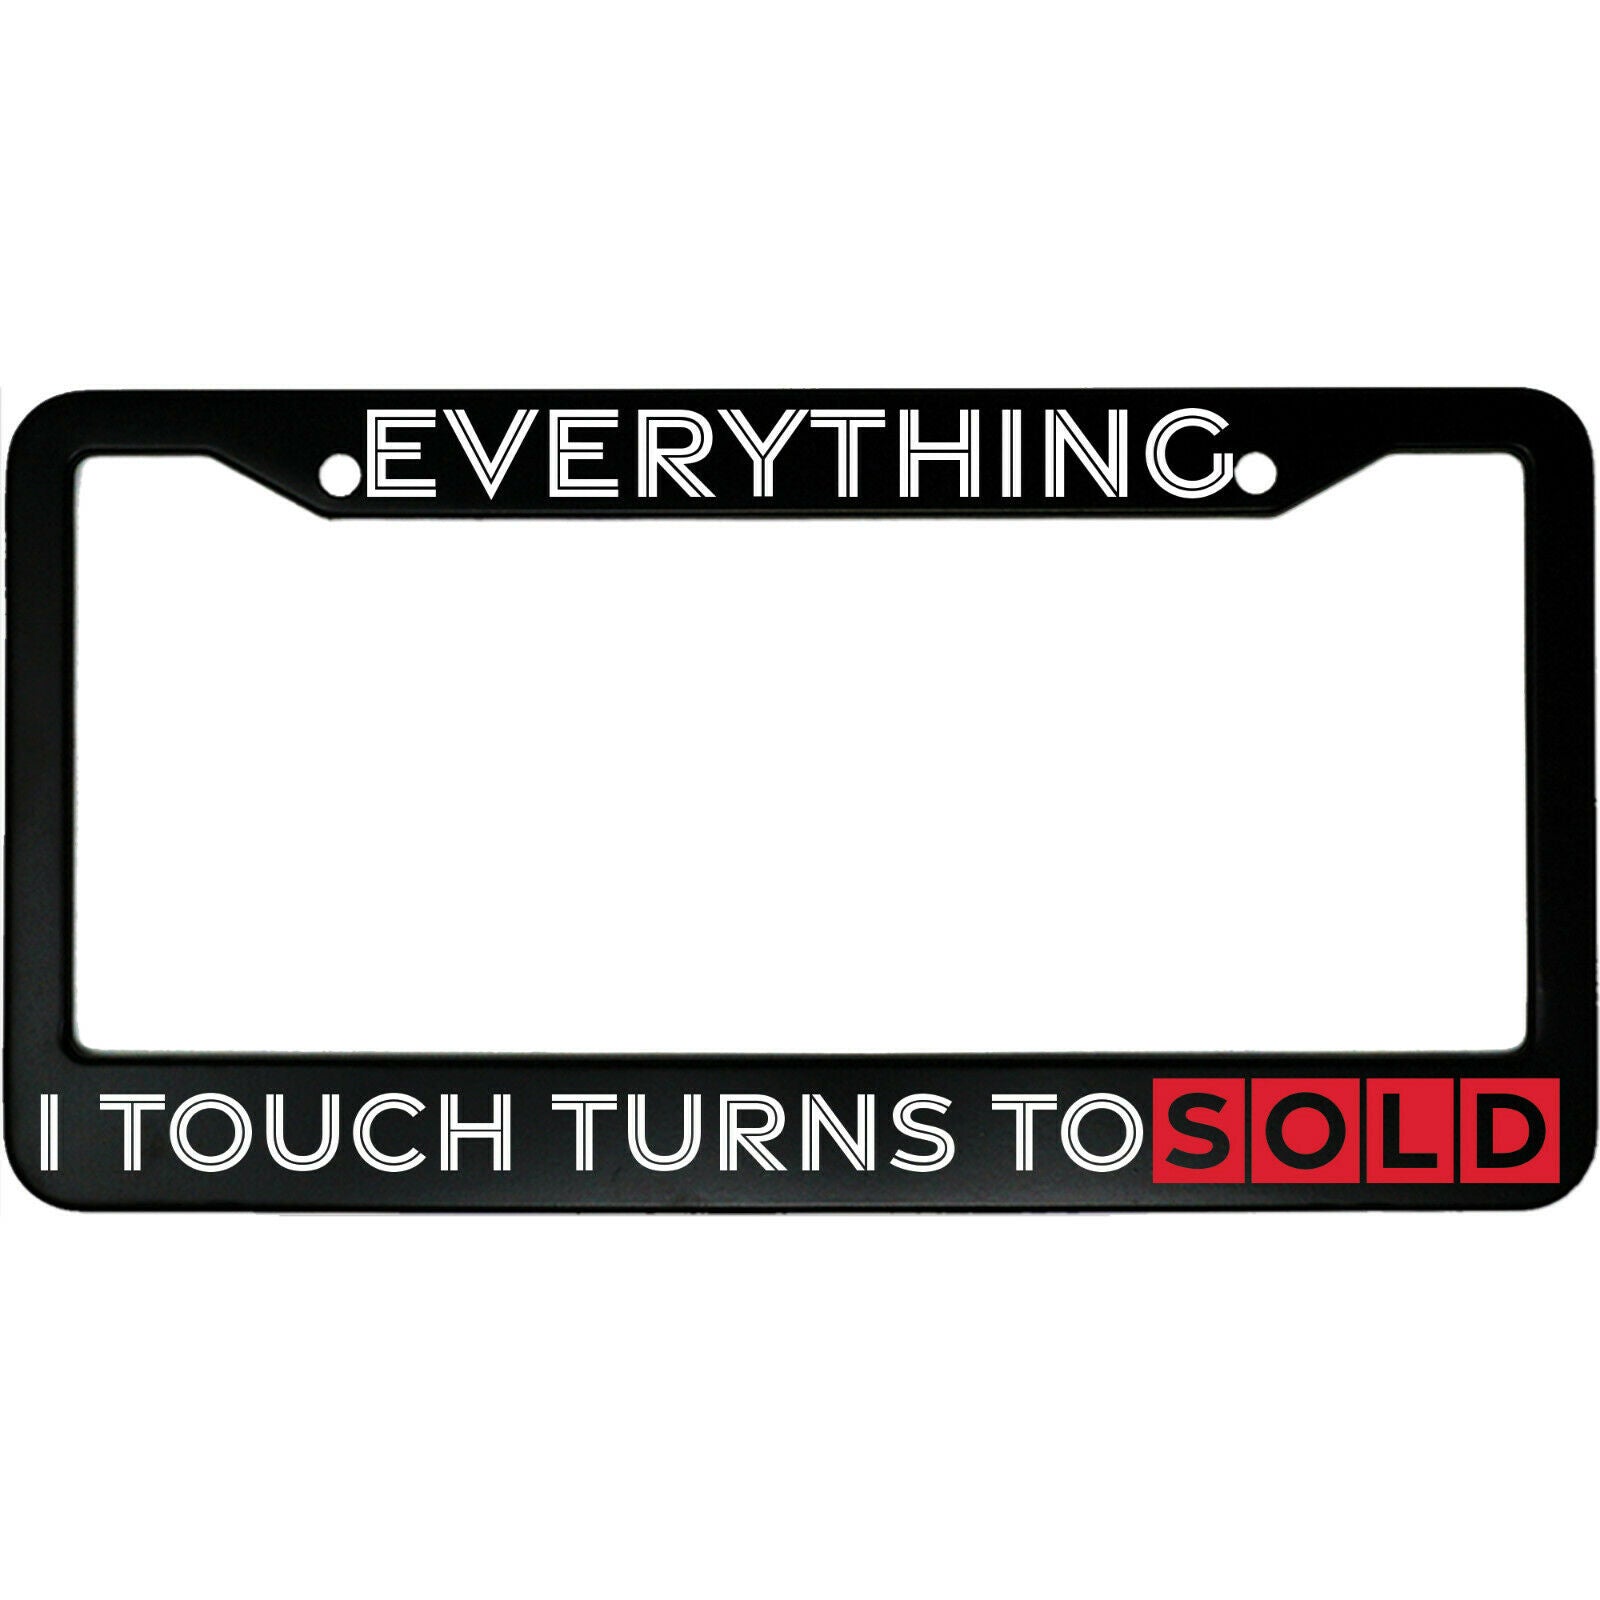 Everything I Touch Turns To Sold